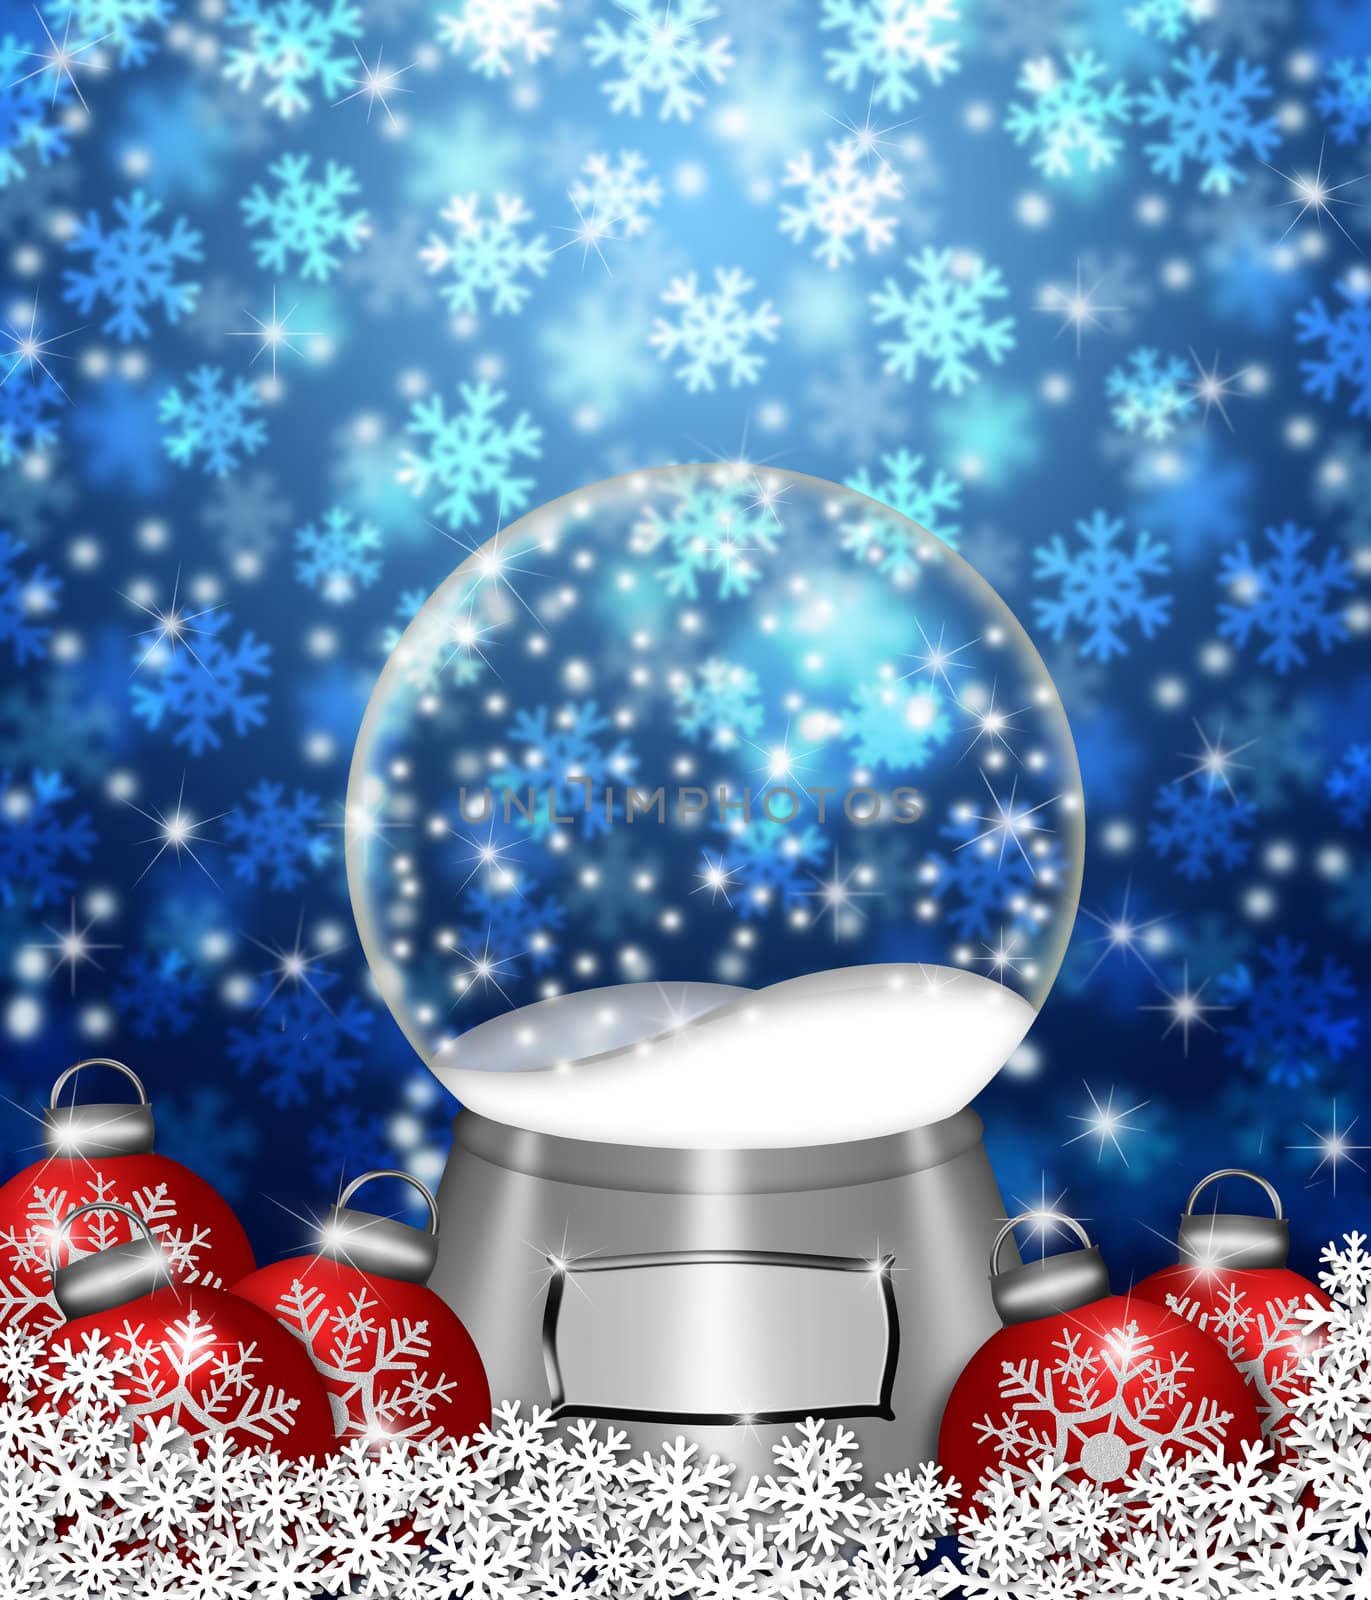 Water Snow Globes Blank Snowflakes and Christmas Tree Ornaments Illustration on Blue Background